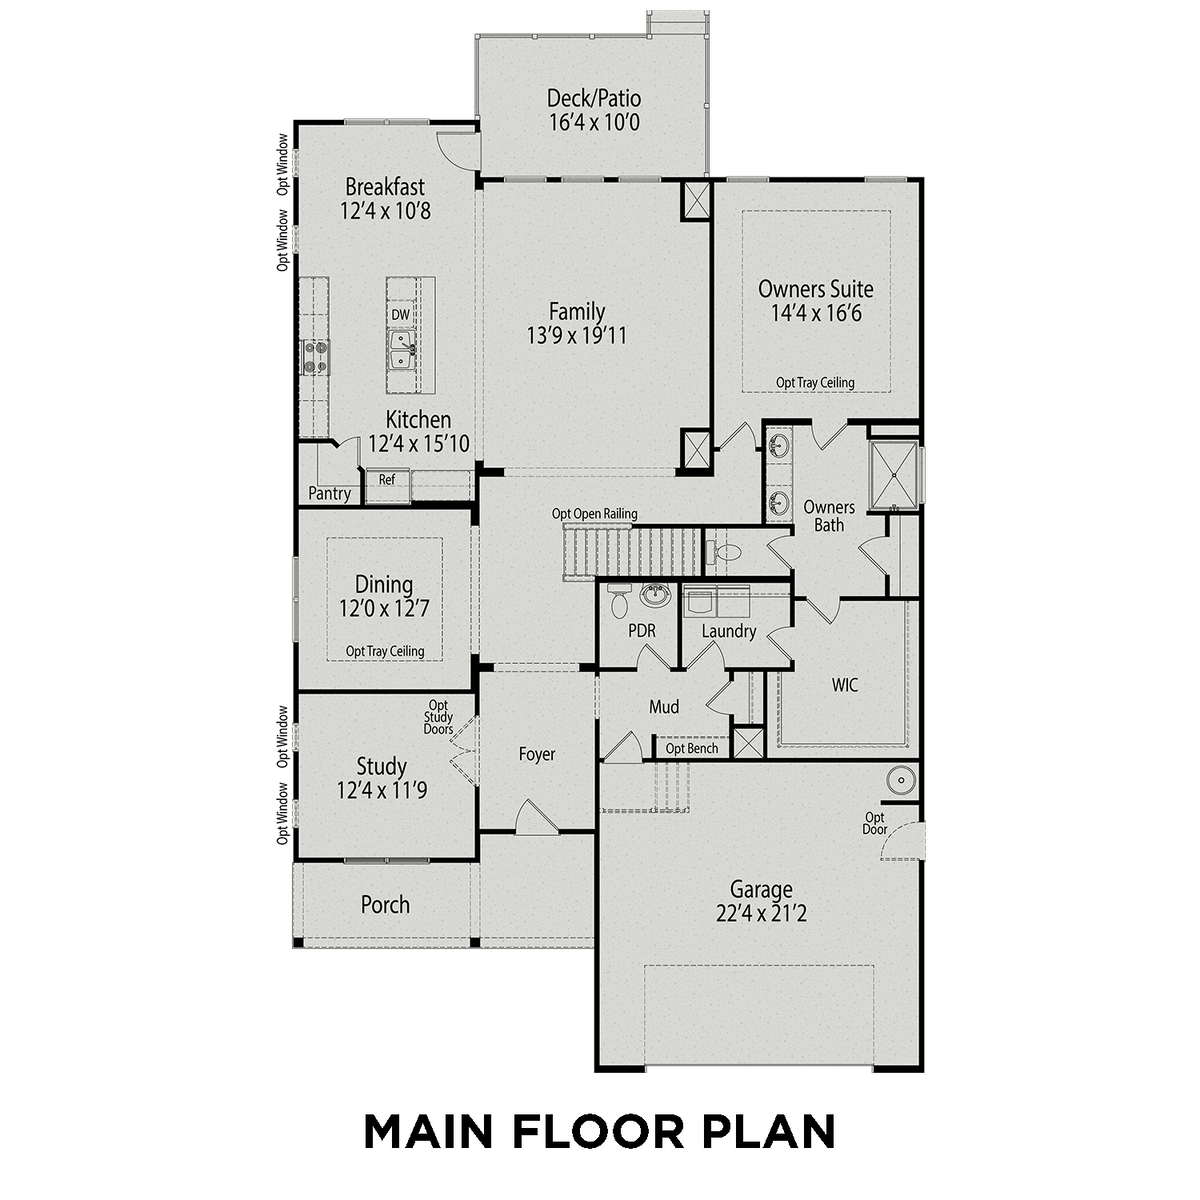 1 - The Cypress A buildable floor plan layout in Davidson Homes' Tobacco Road community.